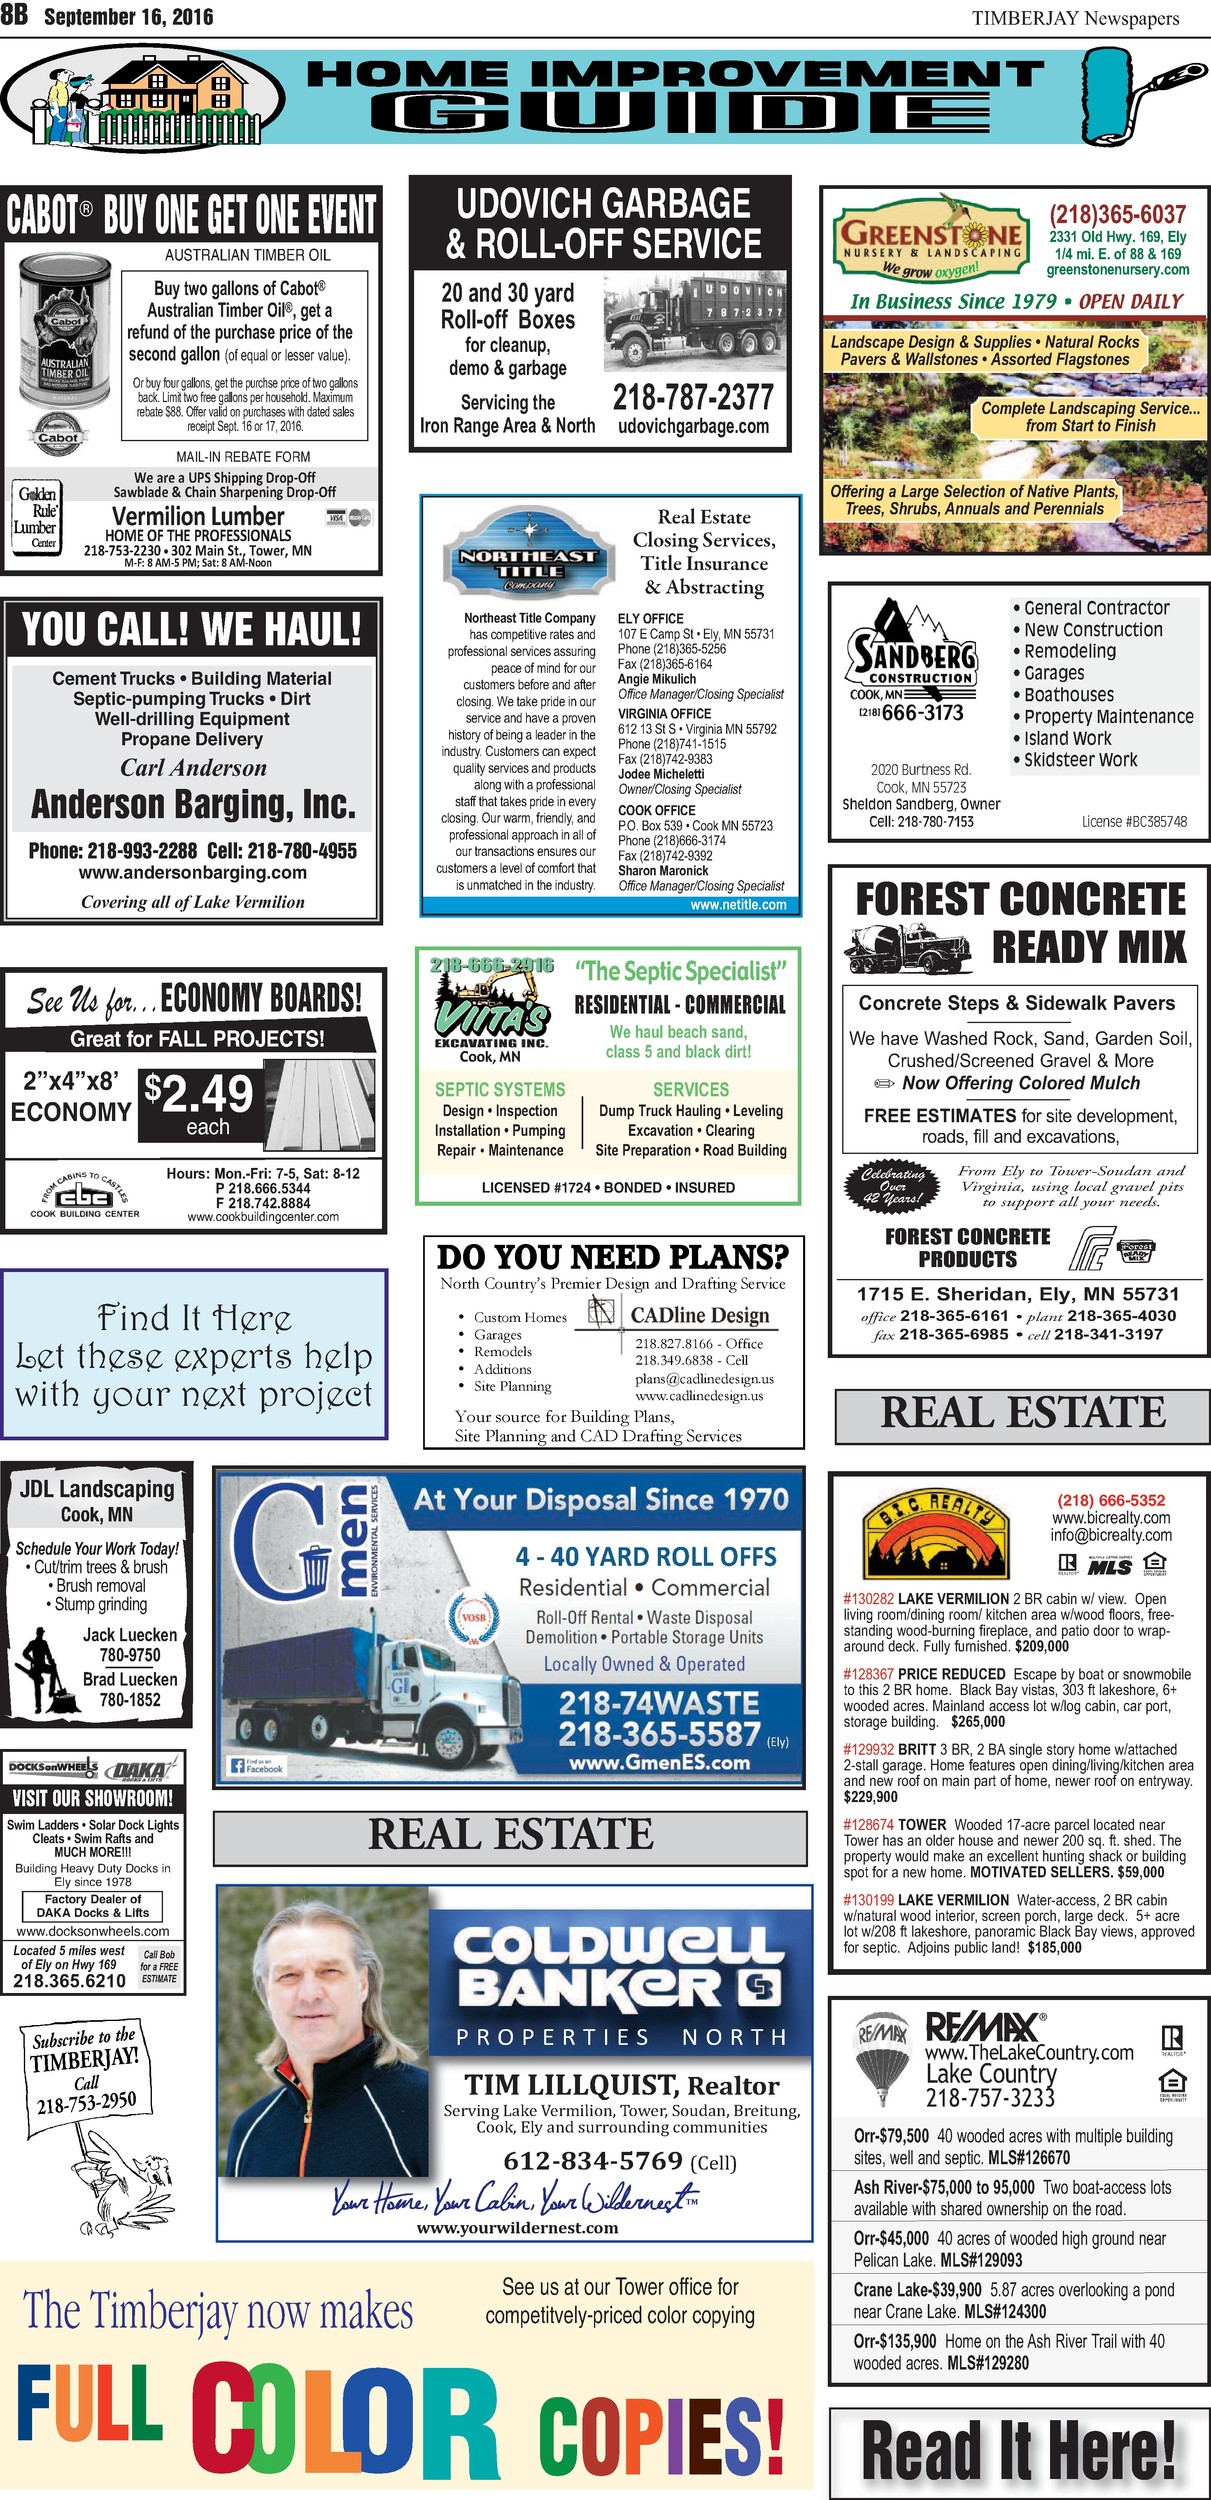 Click here for the legal notices and classifieds from page B8